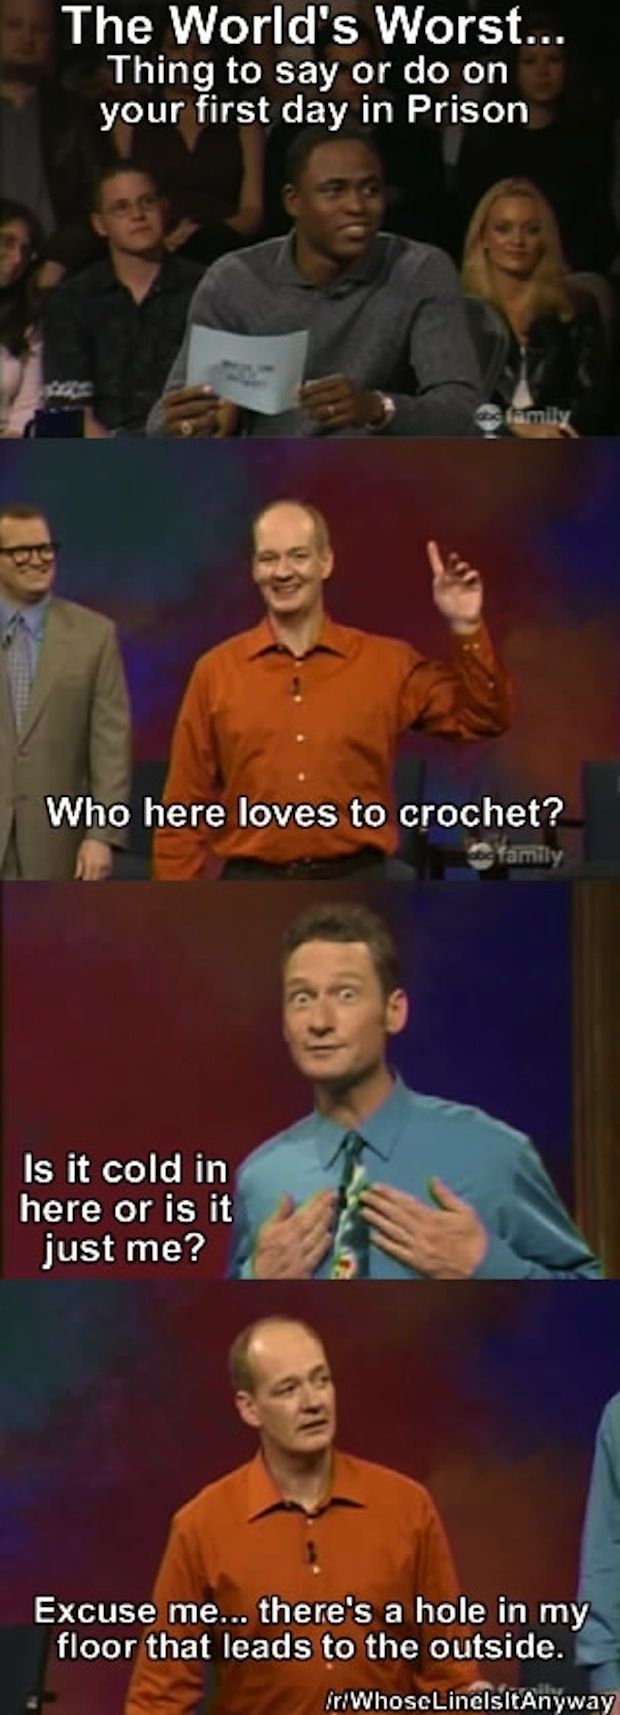 Because now we can learn more of the dos and donts of prison: | 28 Reasons You Should Be Excited That “Whose Line Is It Anyway?”